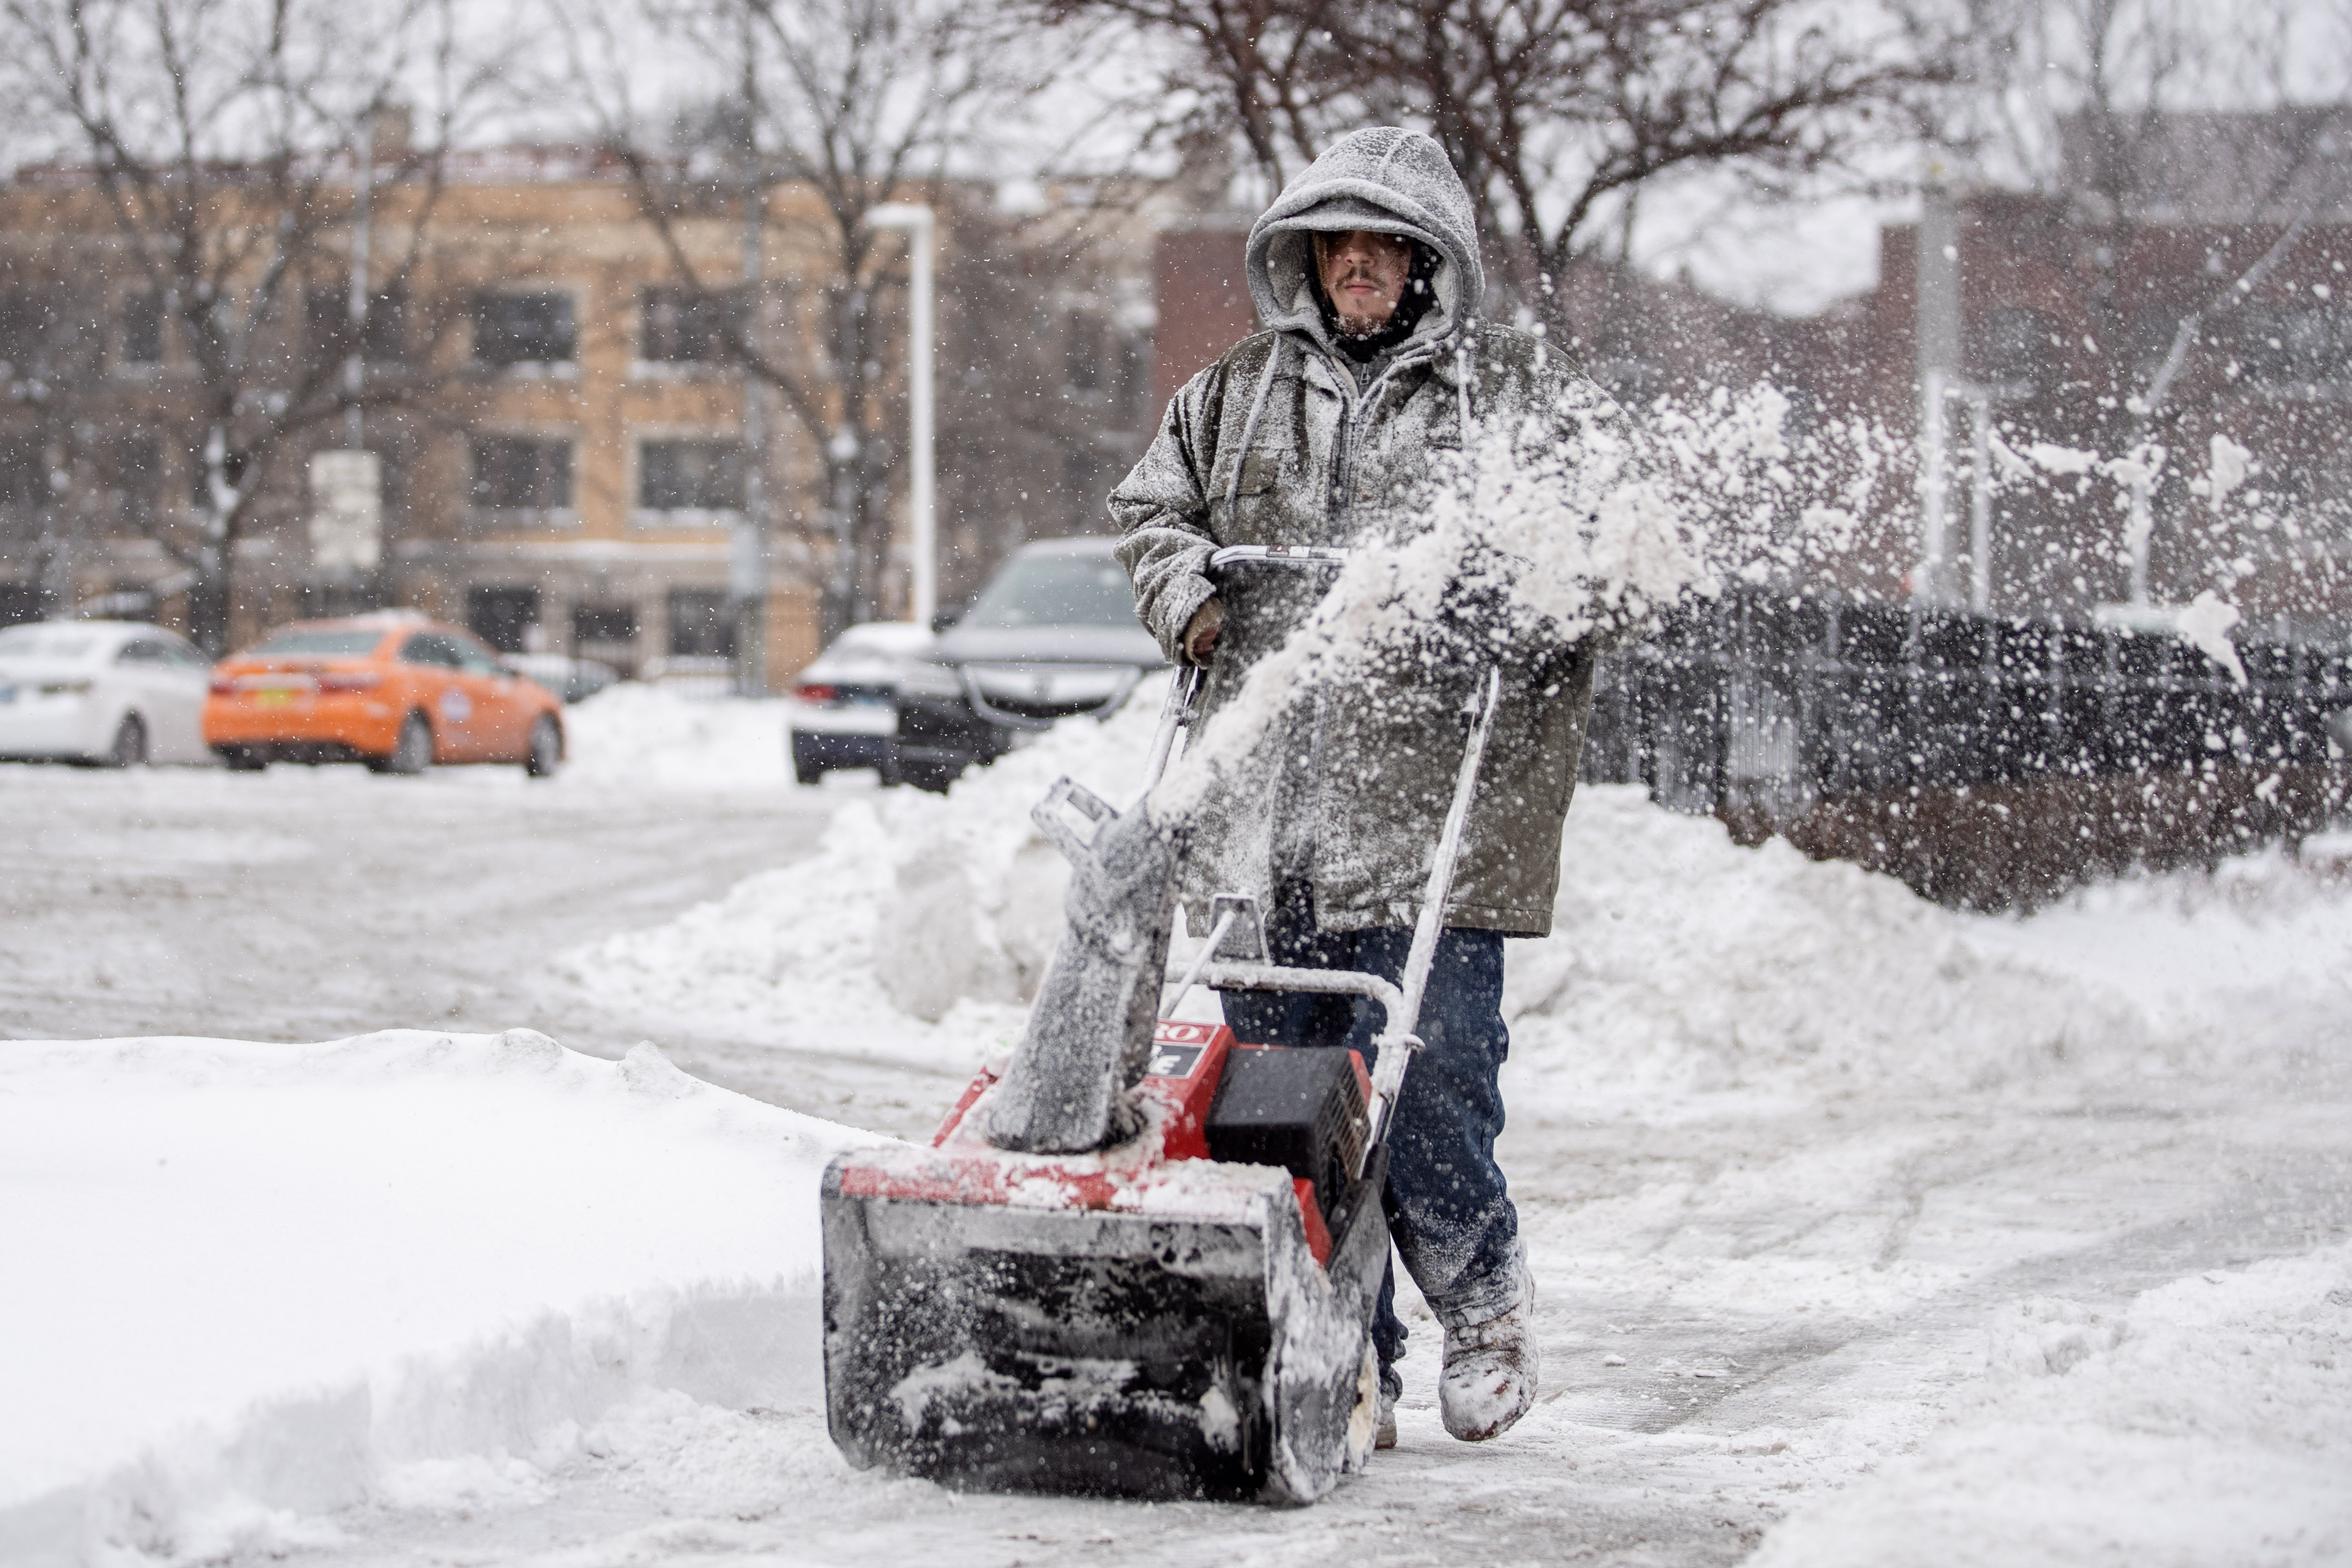 A worker clears snow on the sidewalk of North Sheridan Road in the Lake View neighborhood, Friday morning, Jan. 28, 2022, as lake effect snow enveloped Chicago.